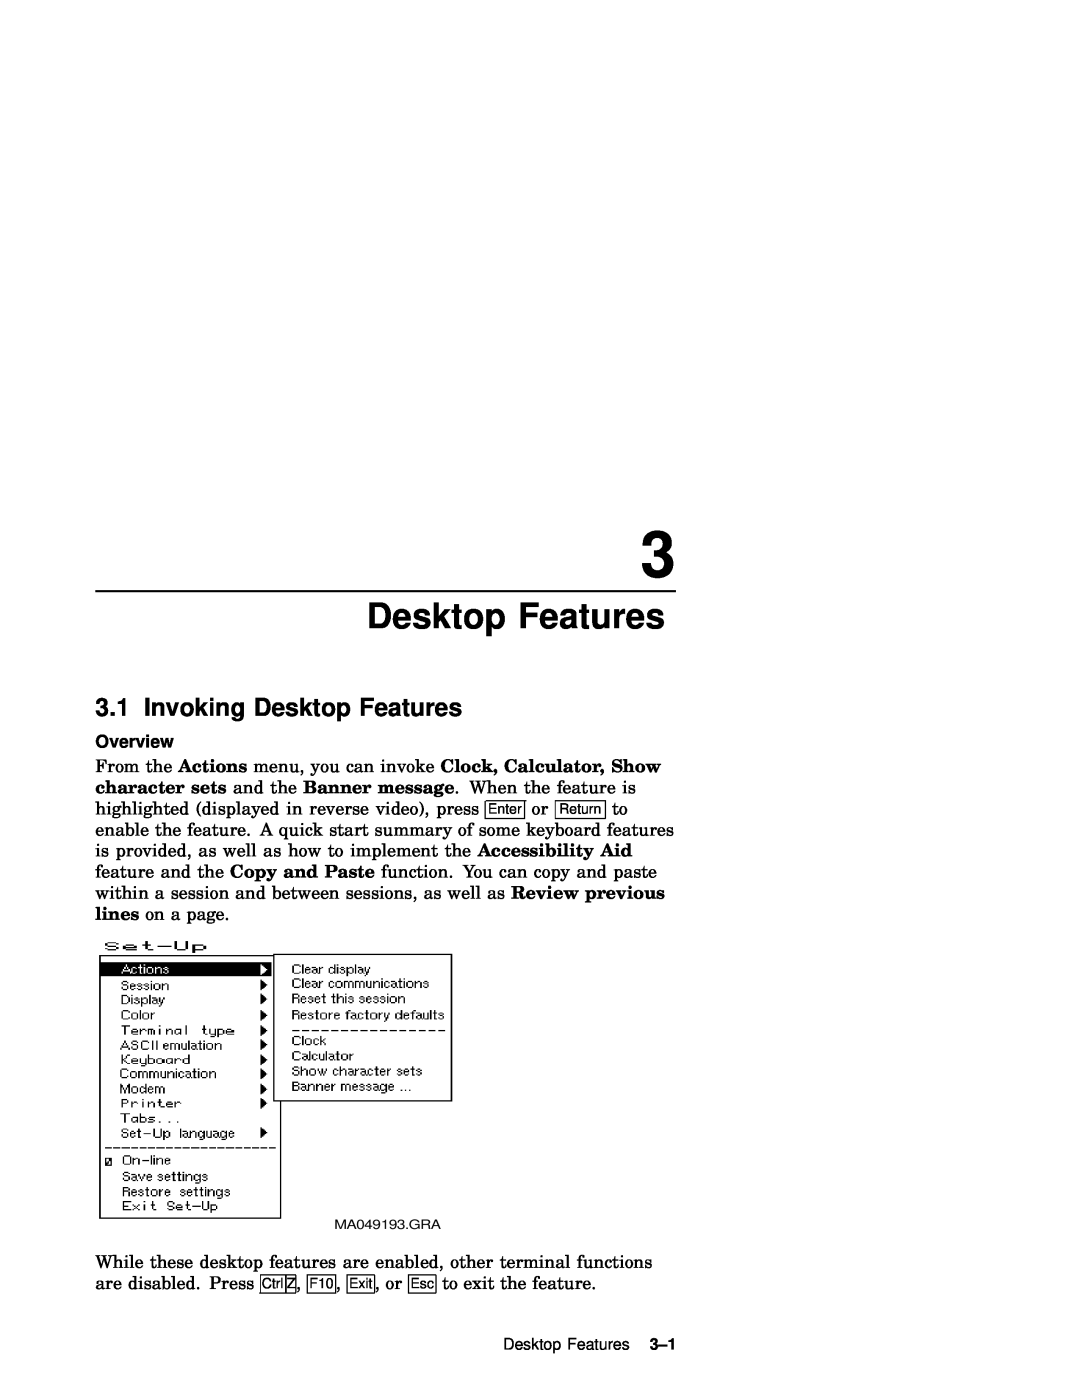 IBM WS525 manual Invoking Desktop Features, Overview 